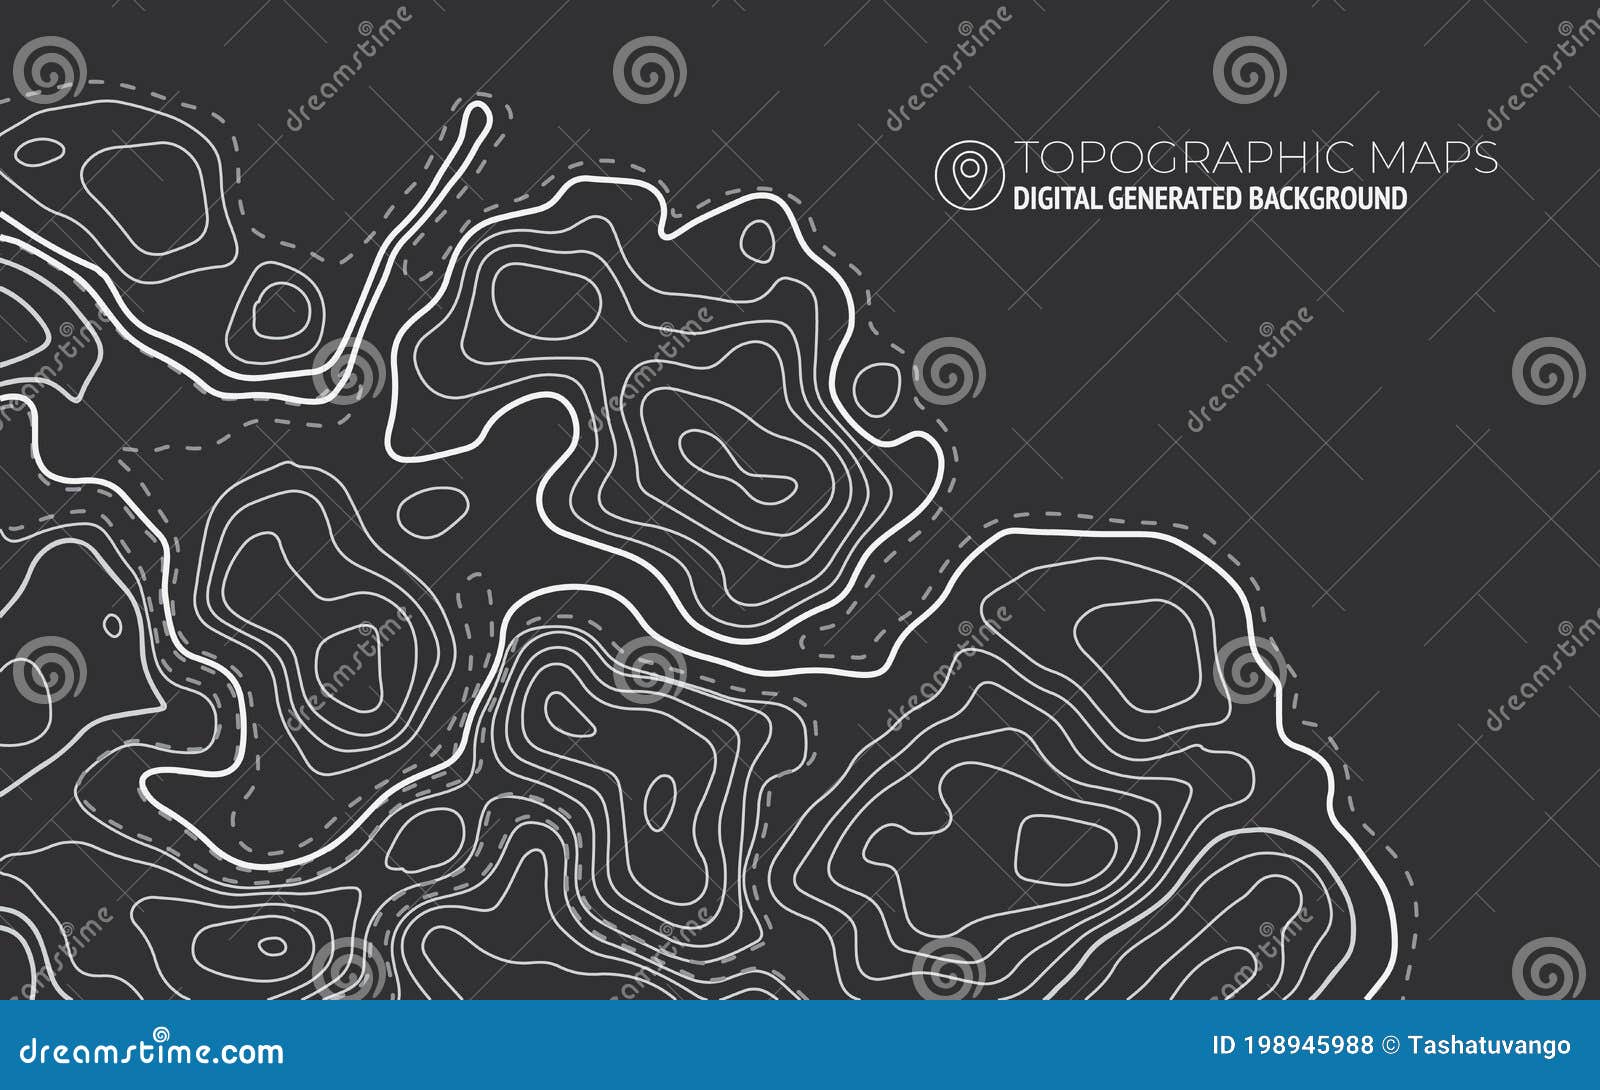 stylized height of topographic contour in lines.